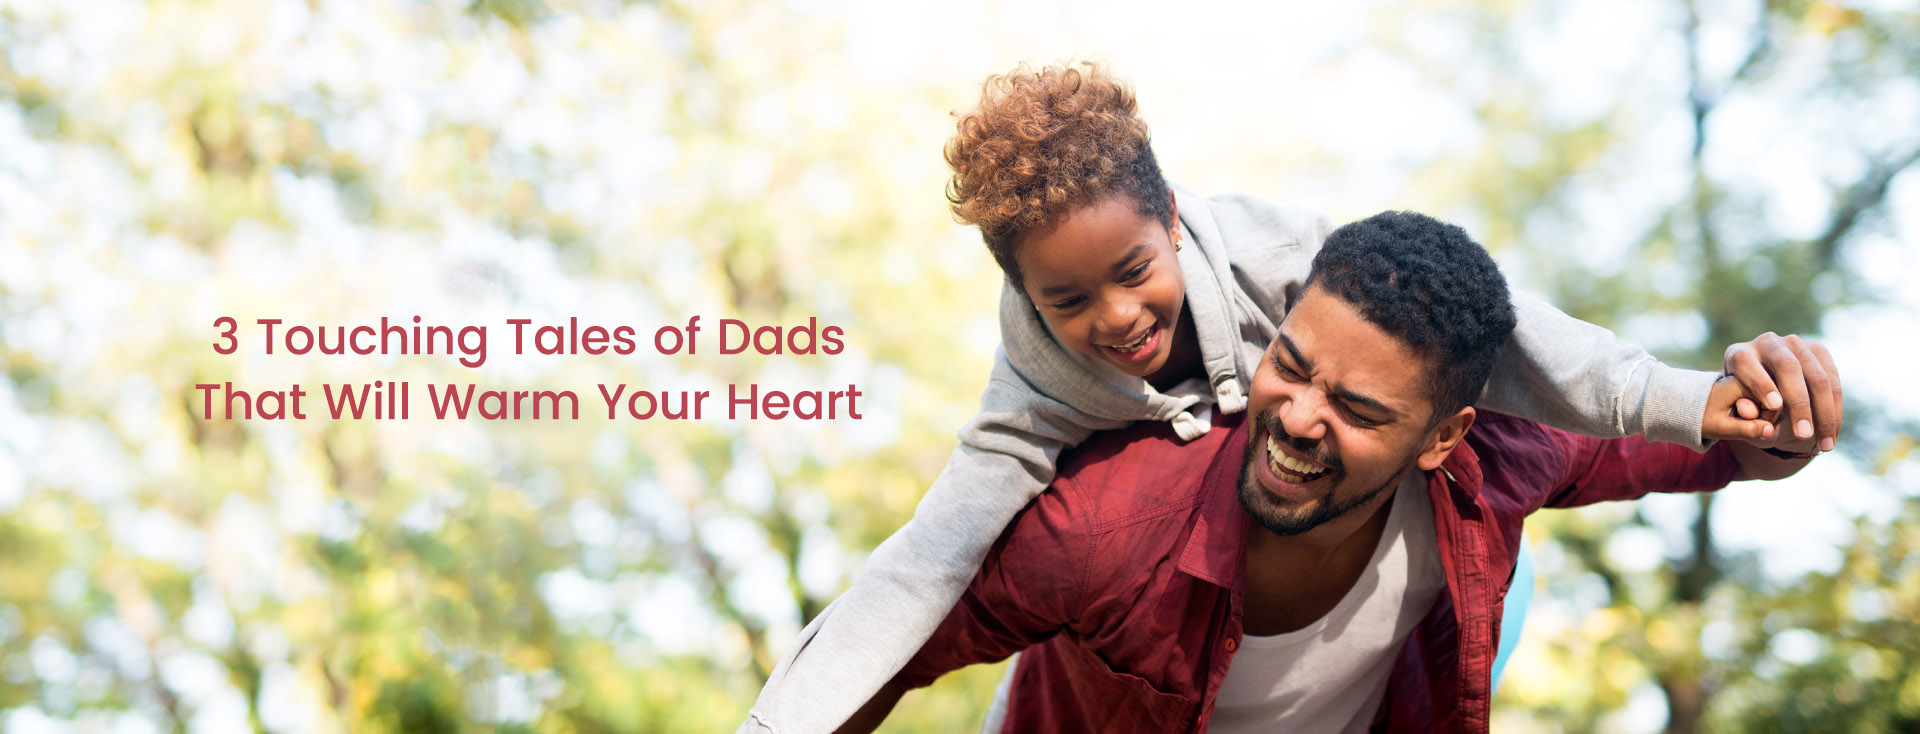 3 Touching Tales of Dads That Will Warm Your Heart